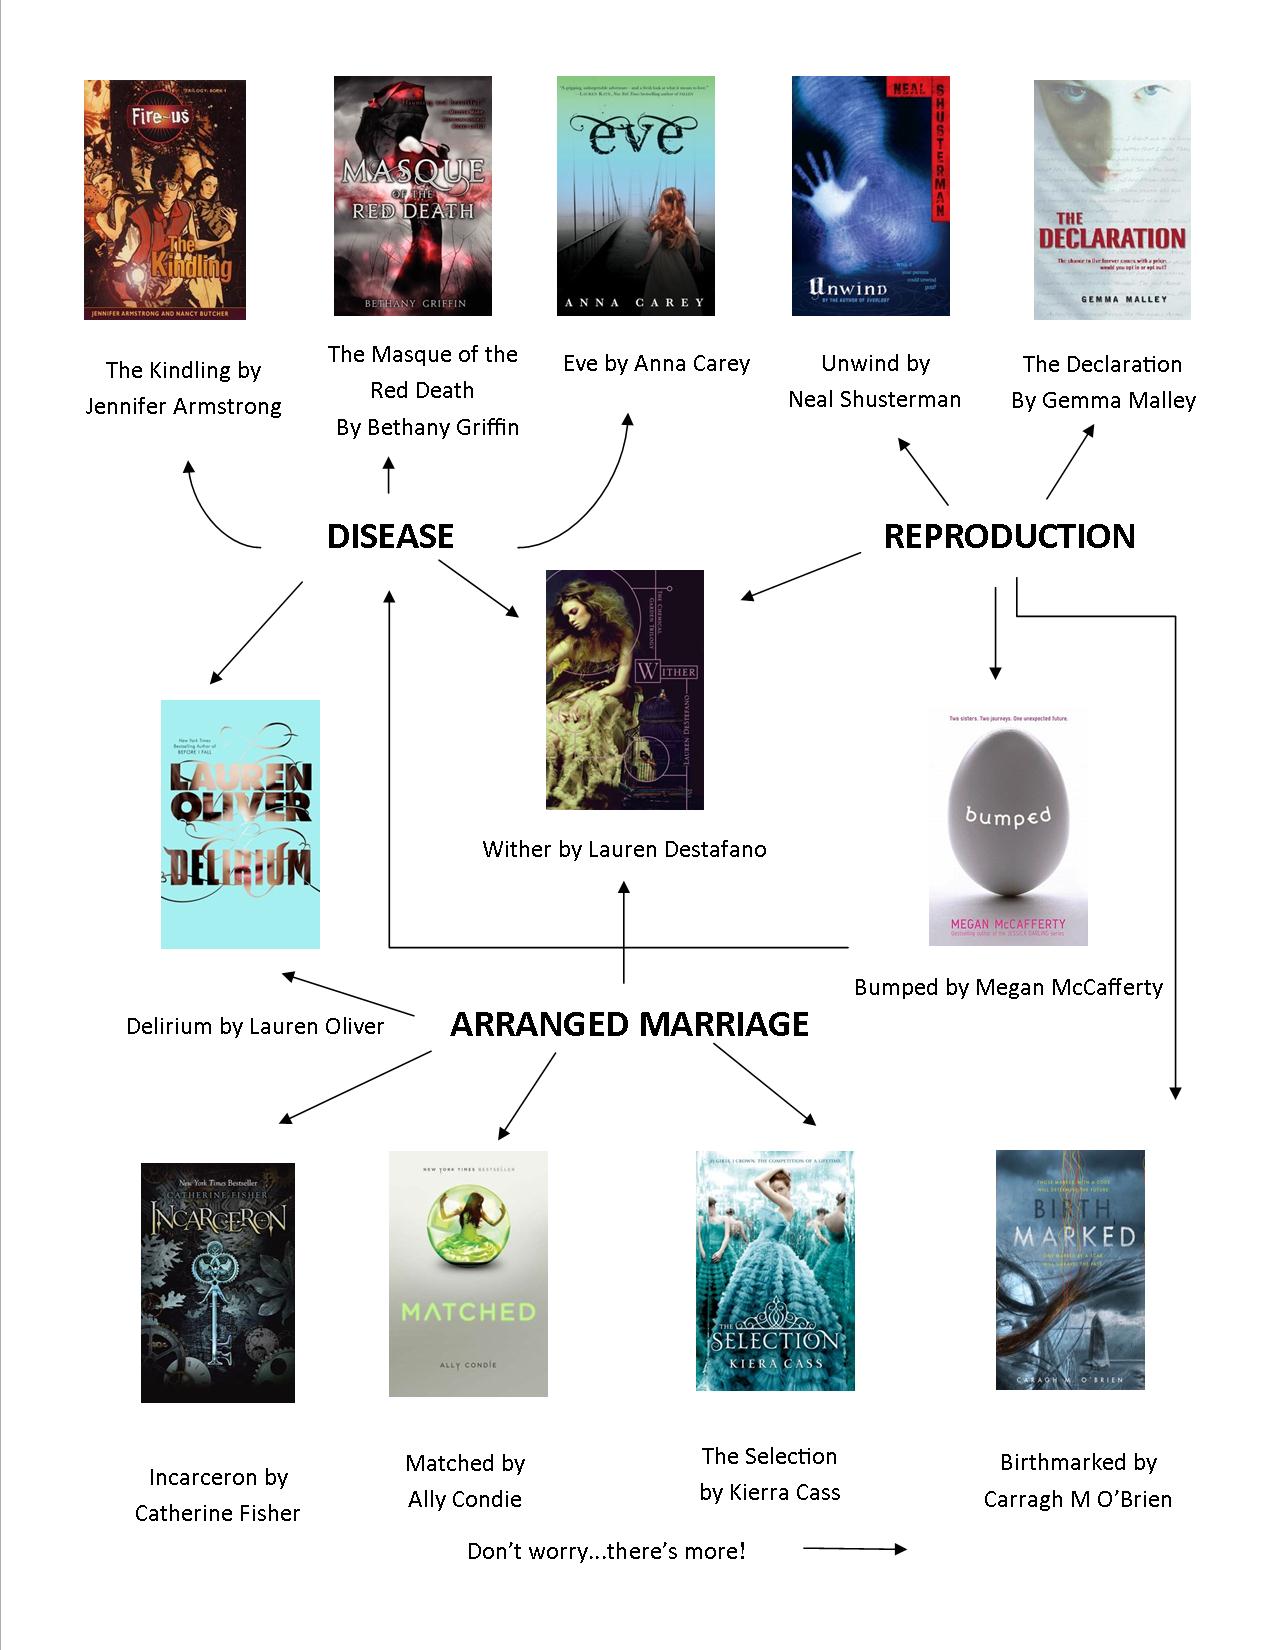 A Guide To The Hunger Games Books In Order [Infographic] - Venngage